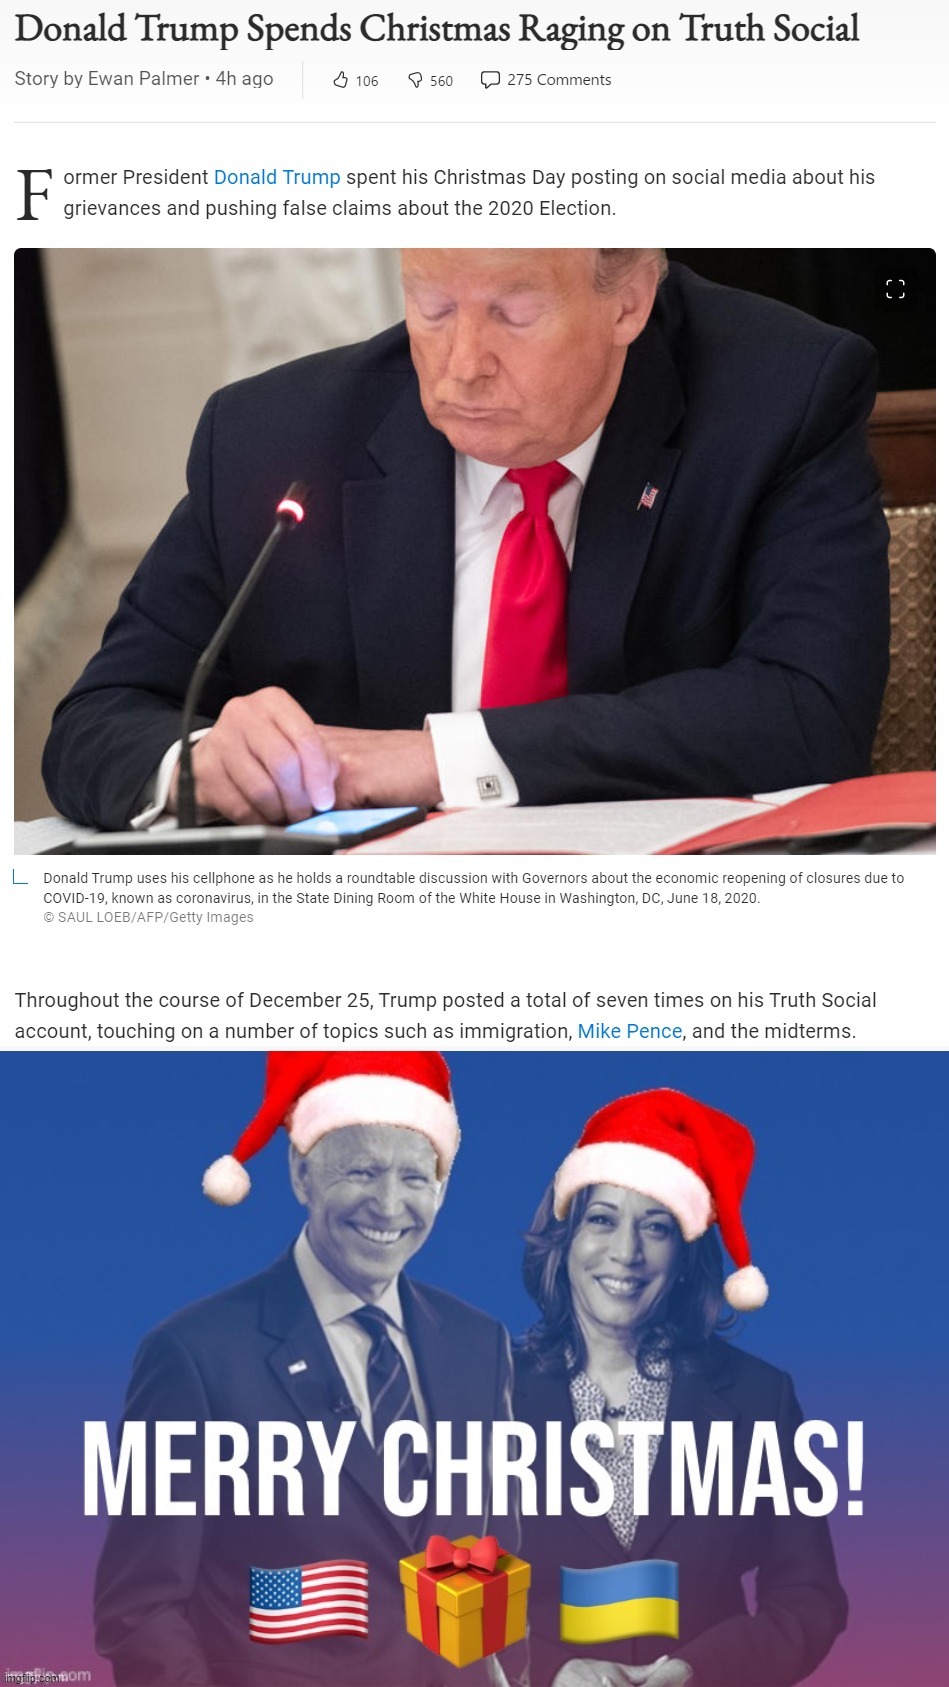 Merry Christmas to you too, Trump! Hope you get to feeling better! | image tagged in donald trump spends christmas raging on truth social,merry christmas biden harris ukraine santa hats | made w/ Imgflip meme maker